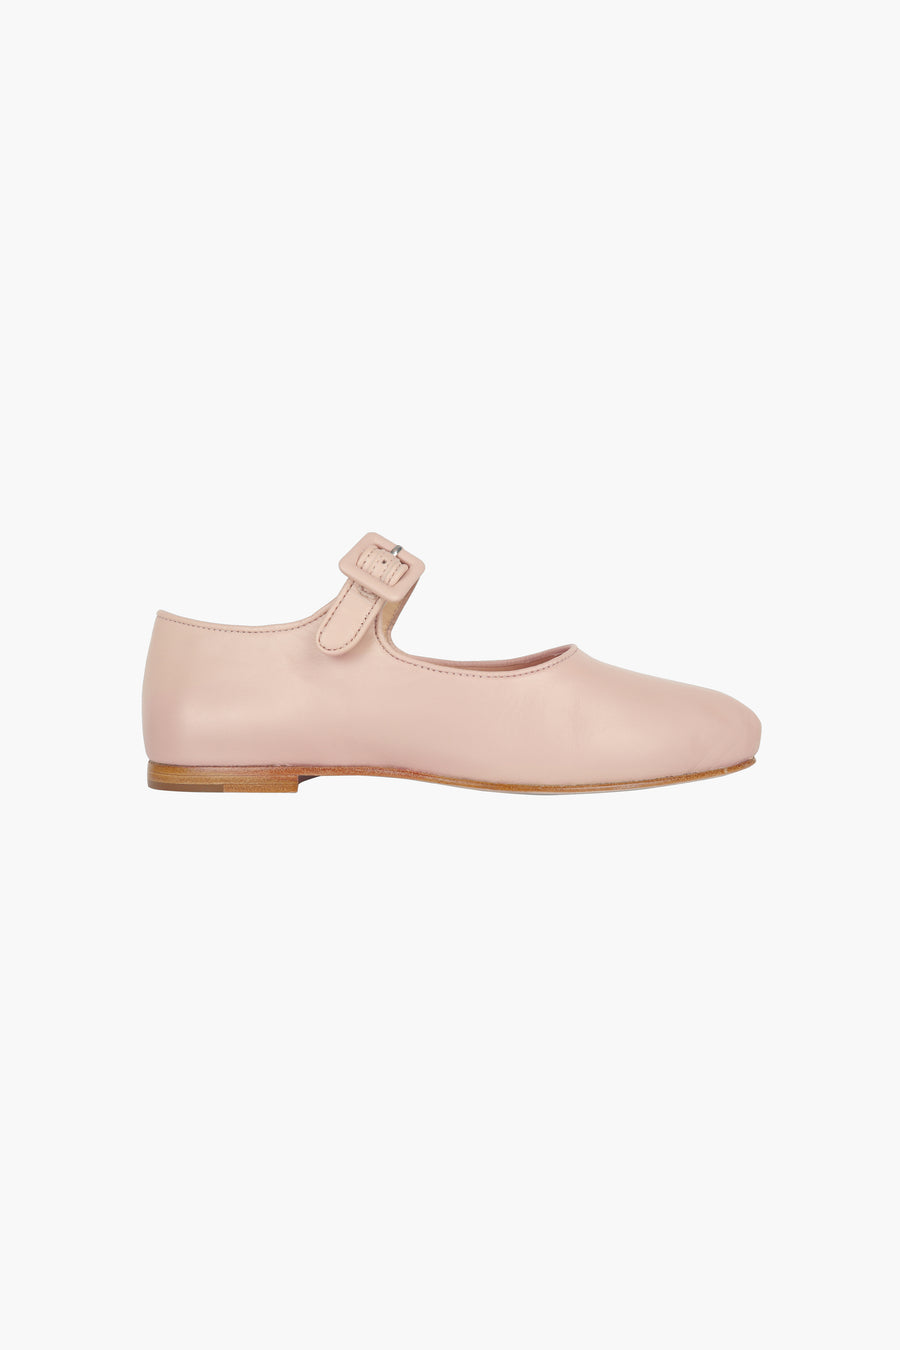 MARY JANE POINTE IN BALLET NAPPA